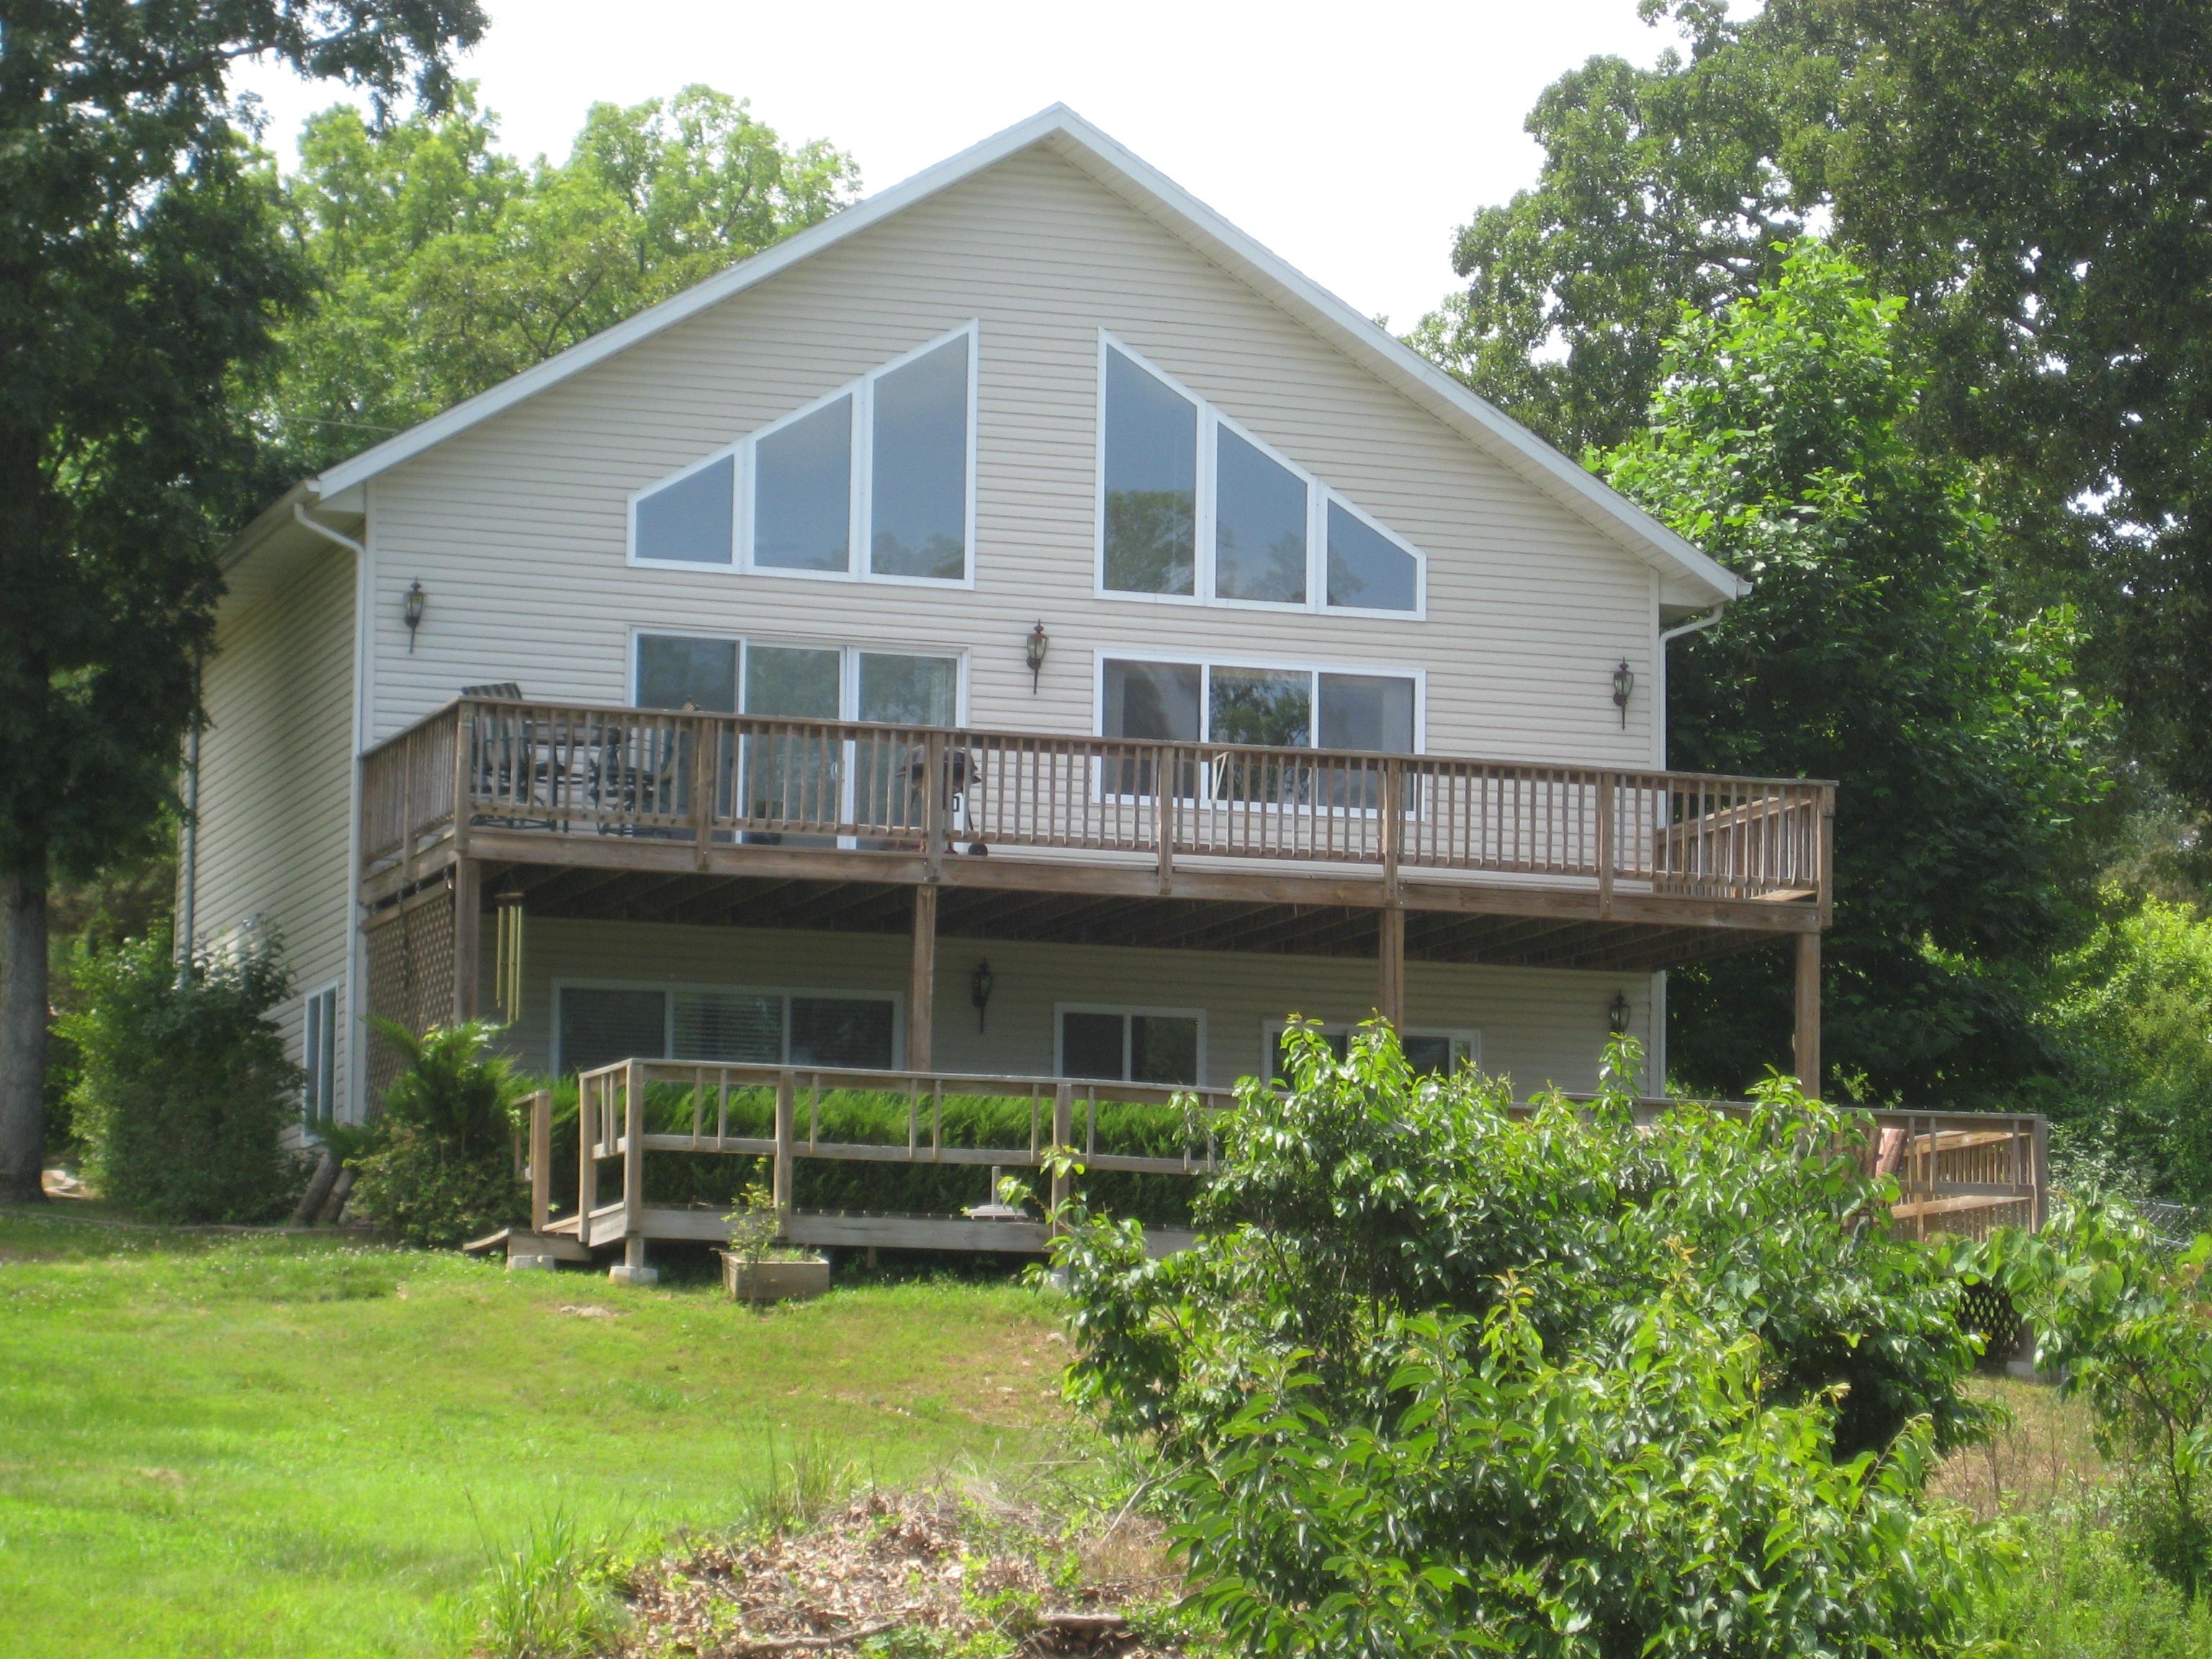 This Lake home is a great place to enjoy the Lake of the Ozarks. 3 BR -2 are MB with 4 baths. Family room with wet bar that opens out to deck with another bar over looking the Lake over 900 sq. ft of decking for your outdoor dining and enjoyment. A short walk to the water and a swim dock and boat slips.